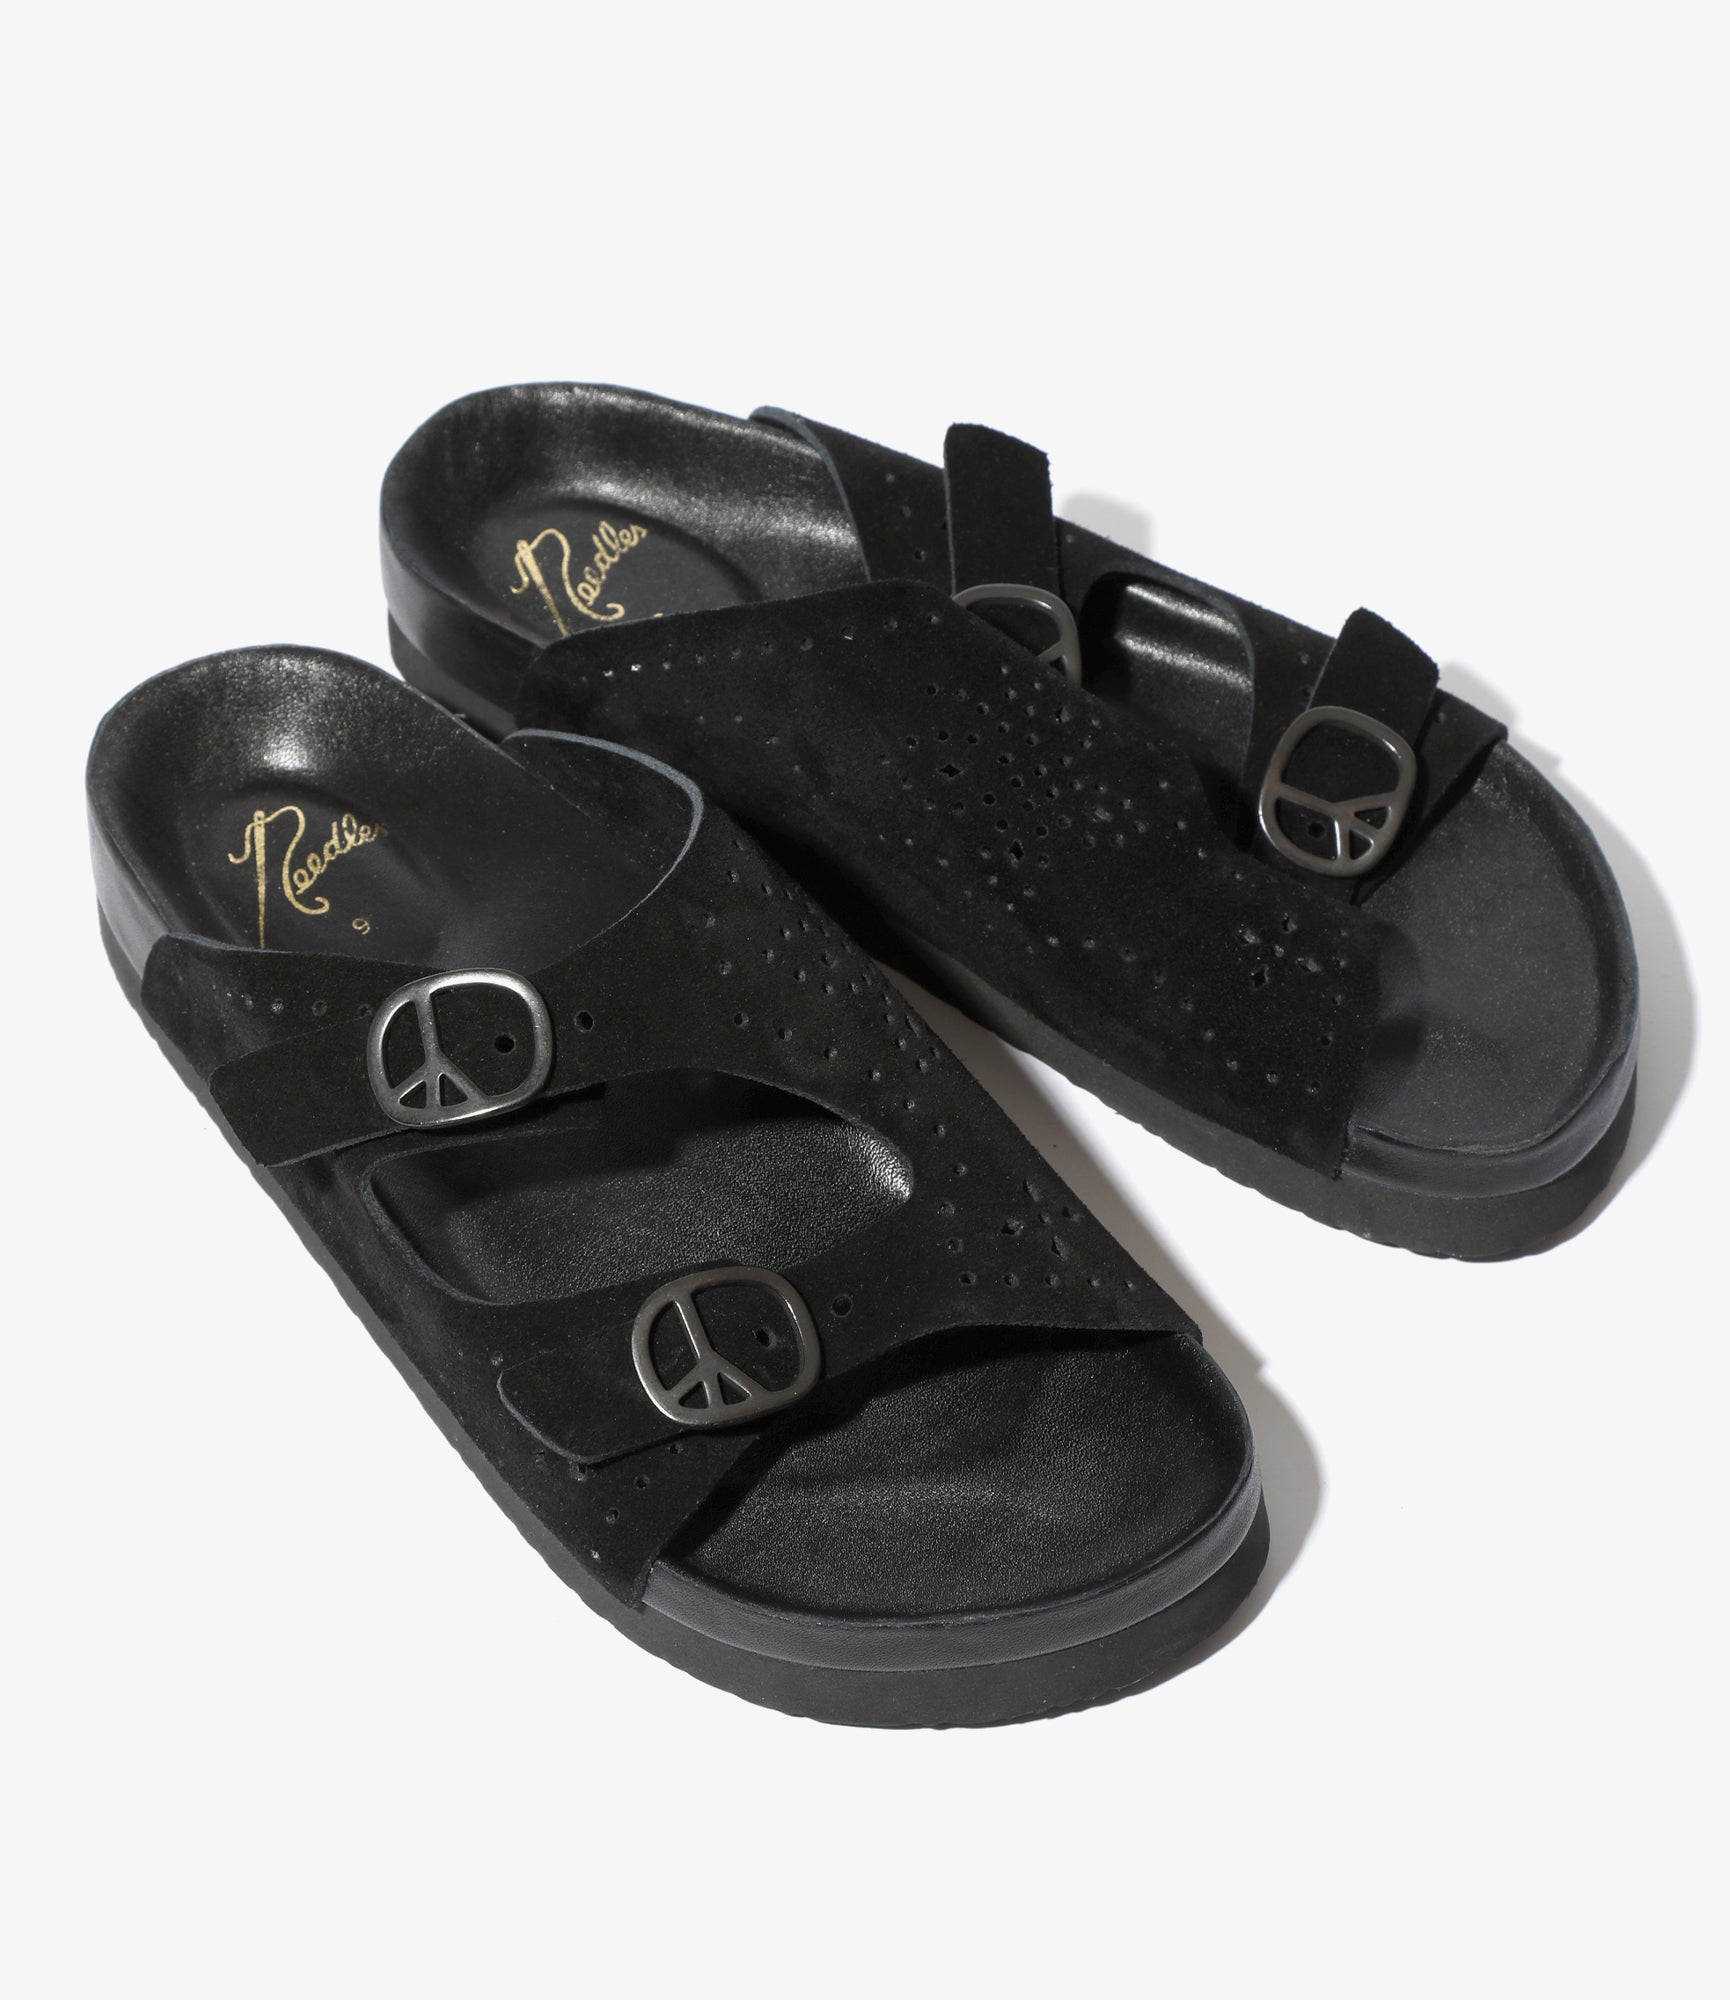 Double Strap Sandal - Black - Suede Leather